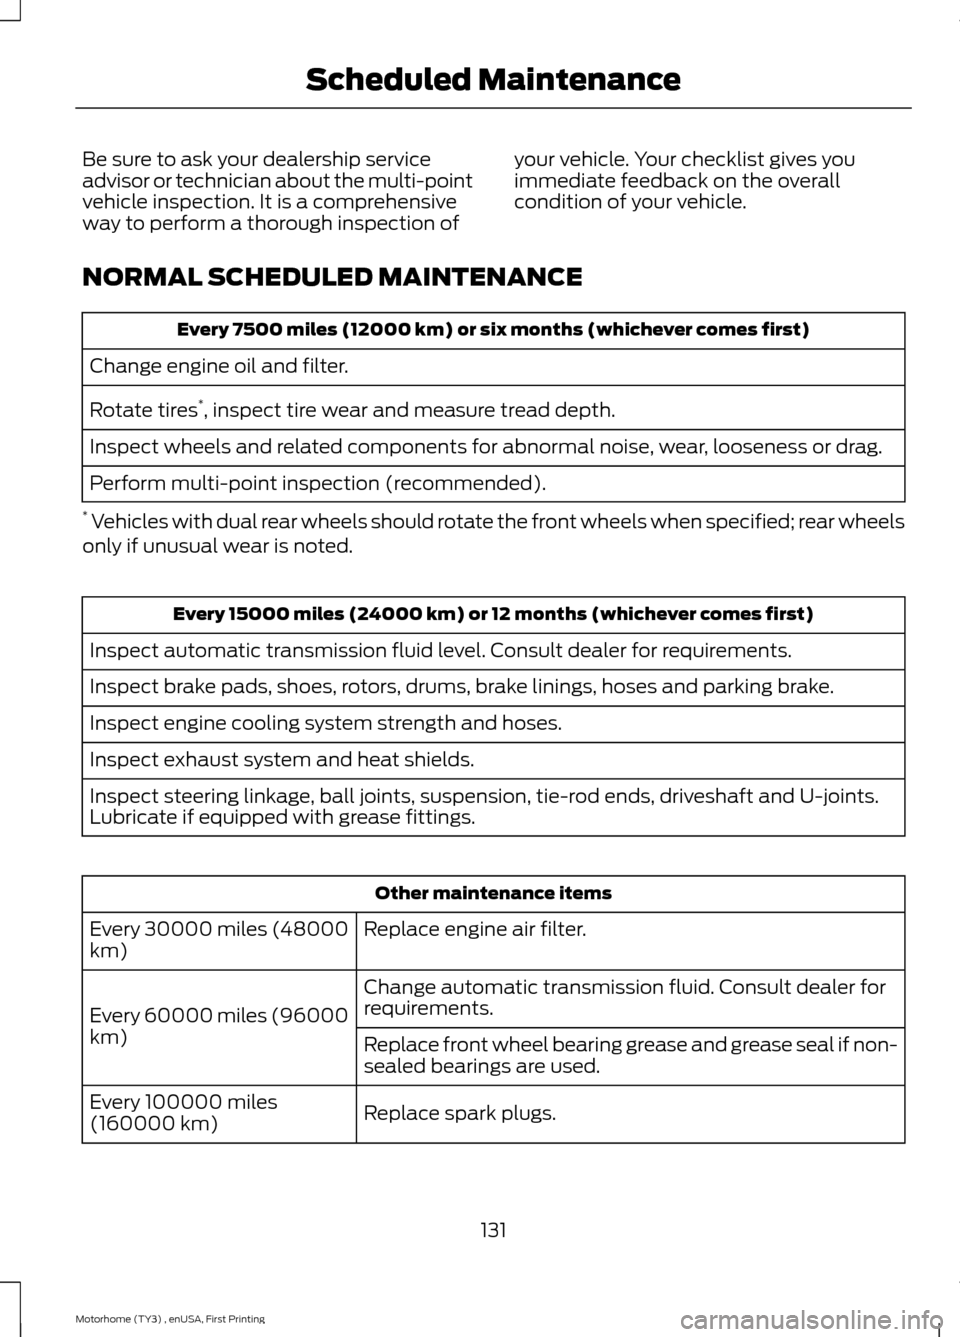 FORD F SERIES MOTORHOME AND COMMERCIAL CHASSIS 2016 13.G Owners Manual Be sure to ask your dealership serviceadvisor or technician about the multi-pointvehicle inspection. It is a comprehensiveway to perform a thorough inspection of
your vehicle. Your checklist gives you